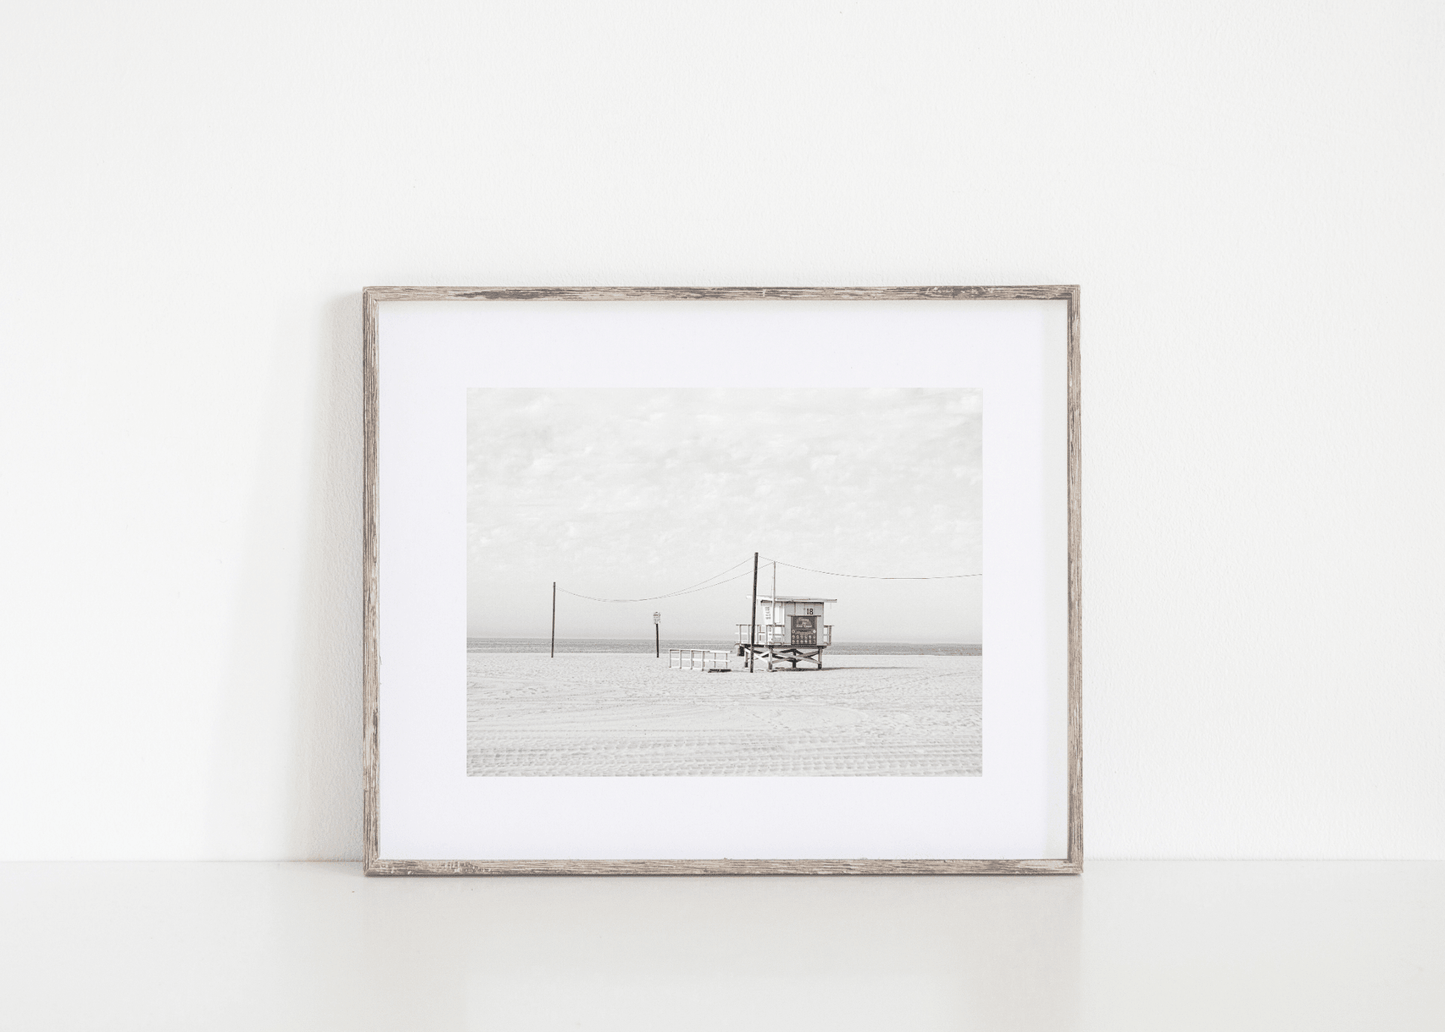 Framed black and white vintage beach photo with a lifeguard stand and ocean in the background. Beach print.  